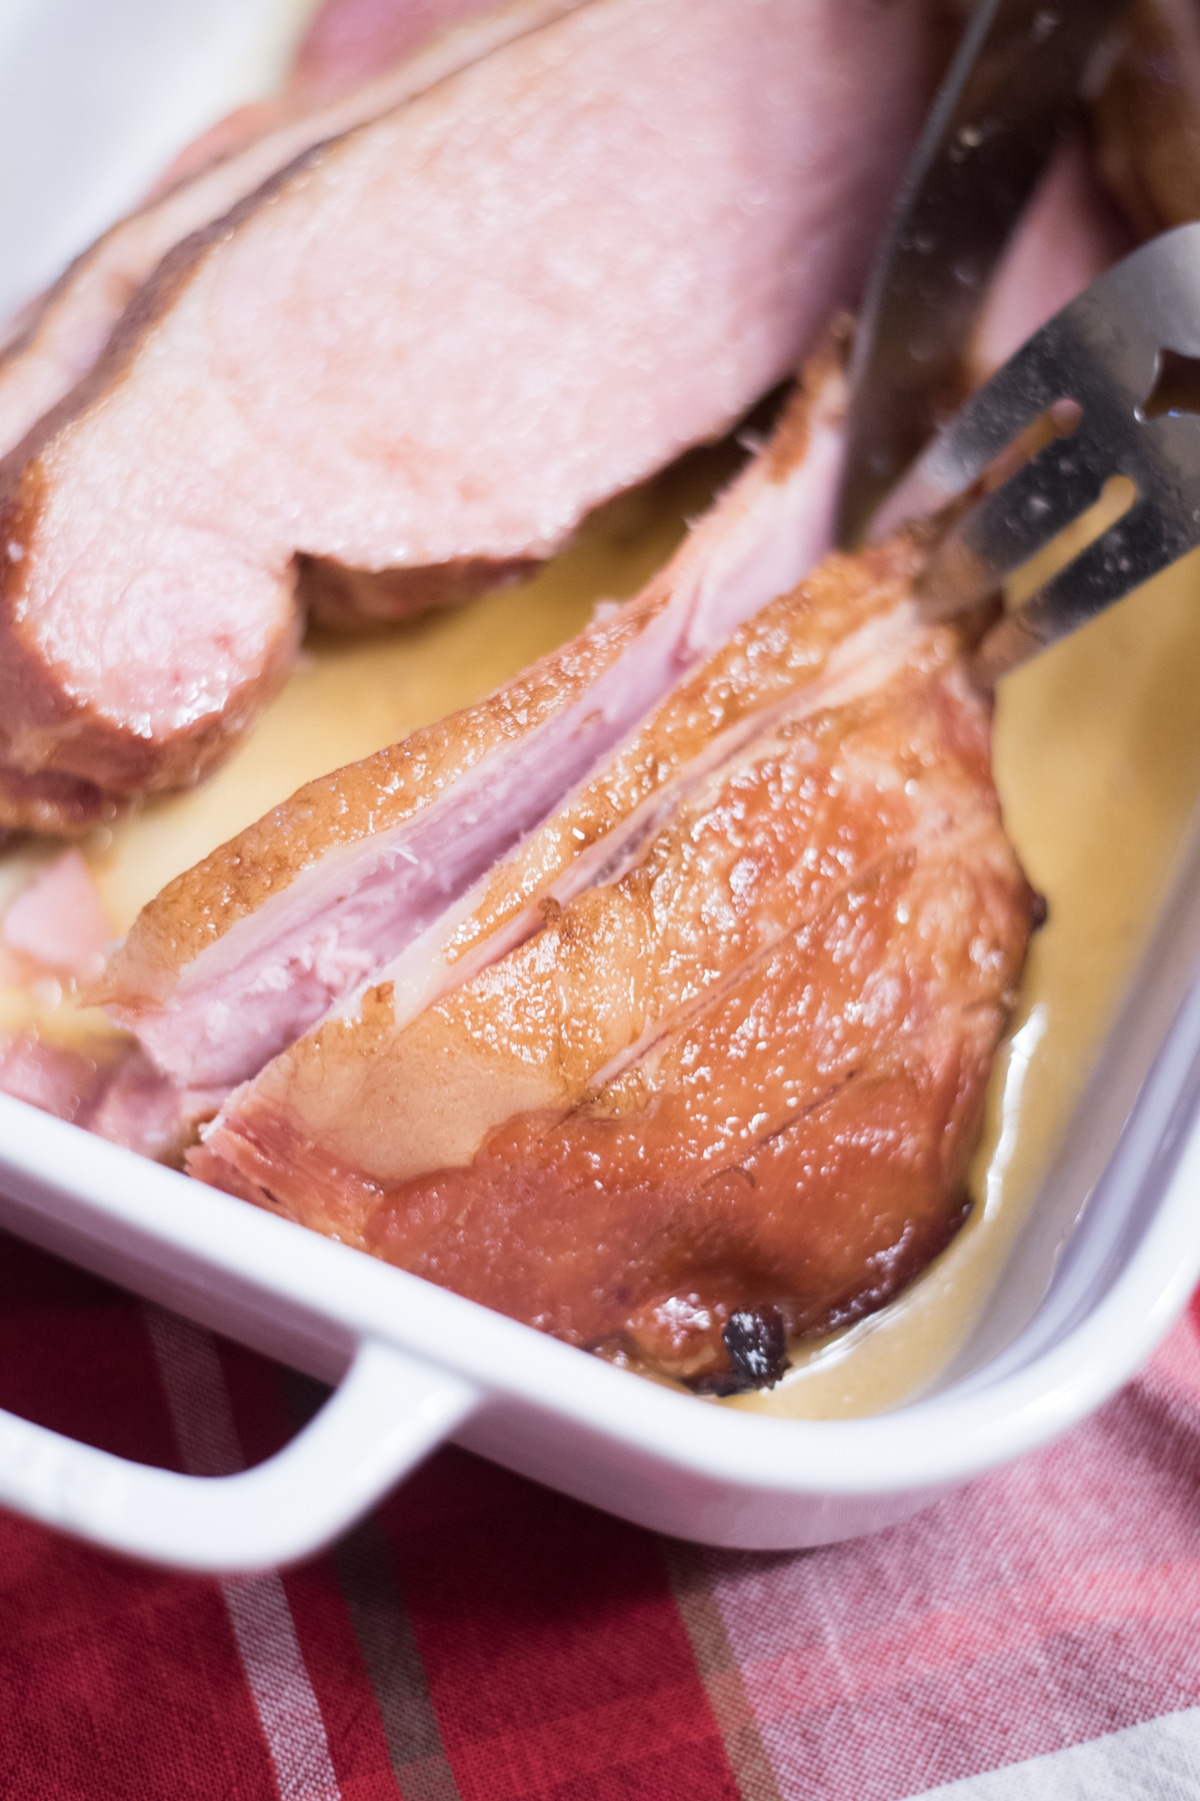 A close up of a plate of food, with Ham